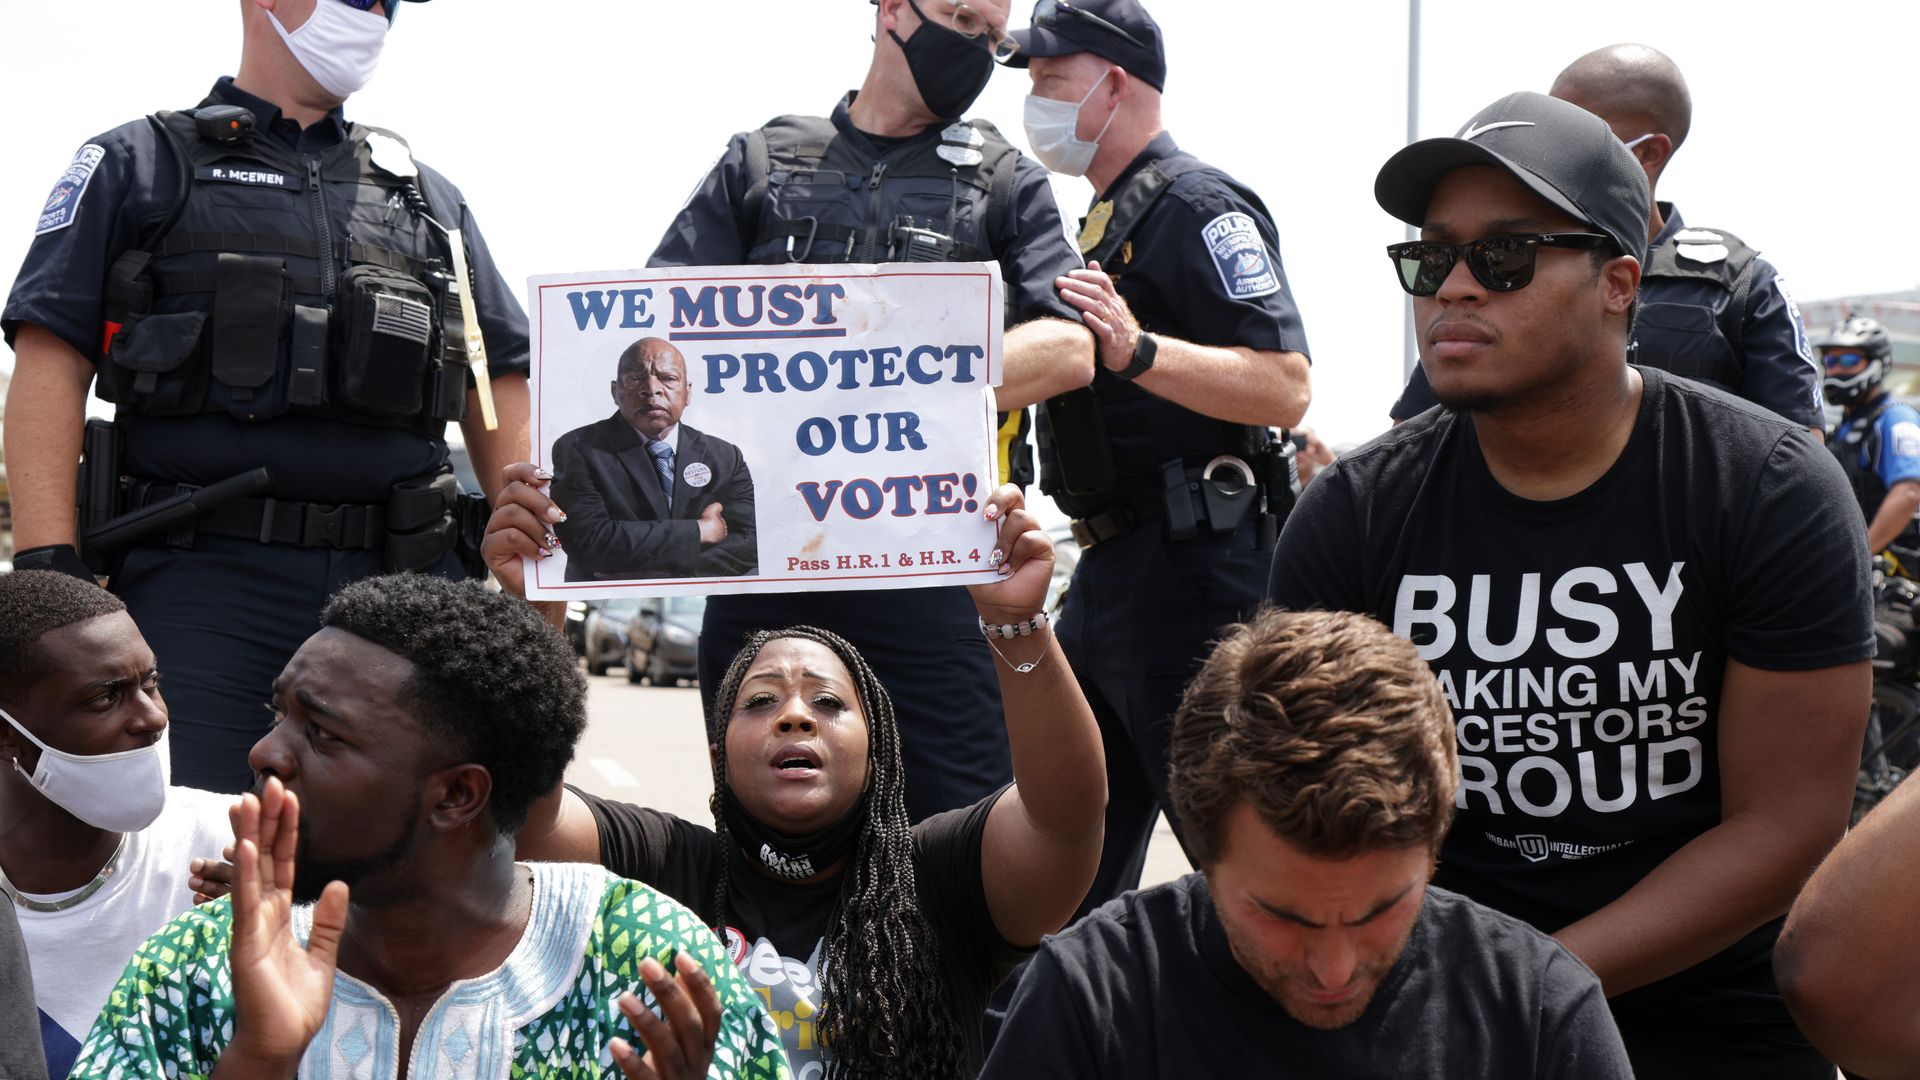 Shenita Binns of Atlanta, Georgia, holds up a sign that reads "We Must Protect Our Vote!" as she and other voting rights activists participate in a “Freedom Friday March” protest.